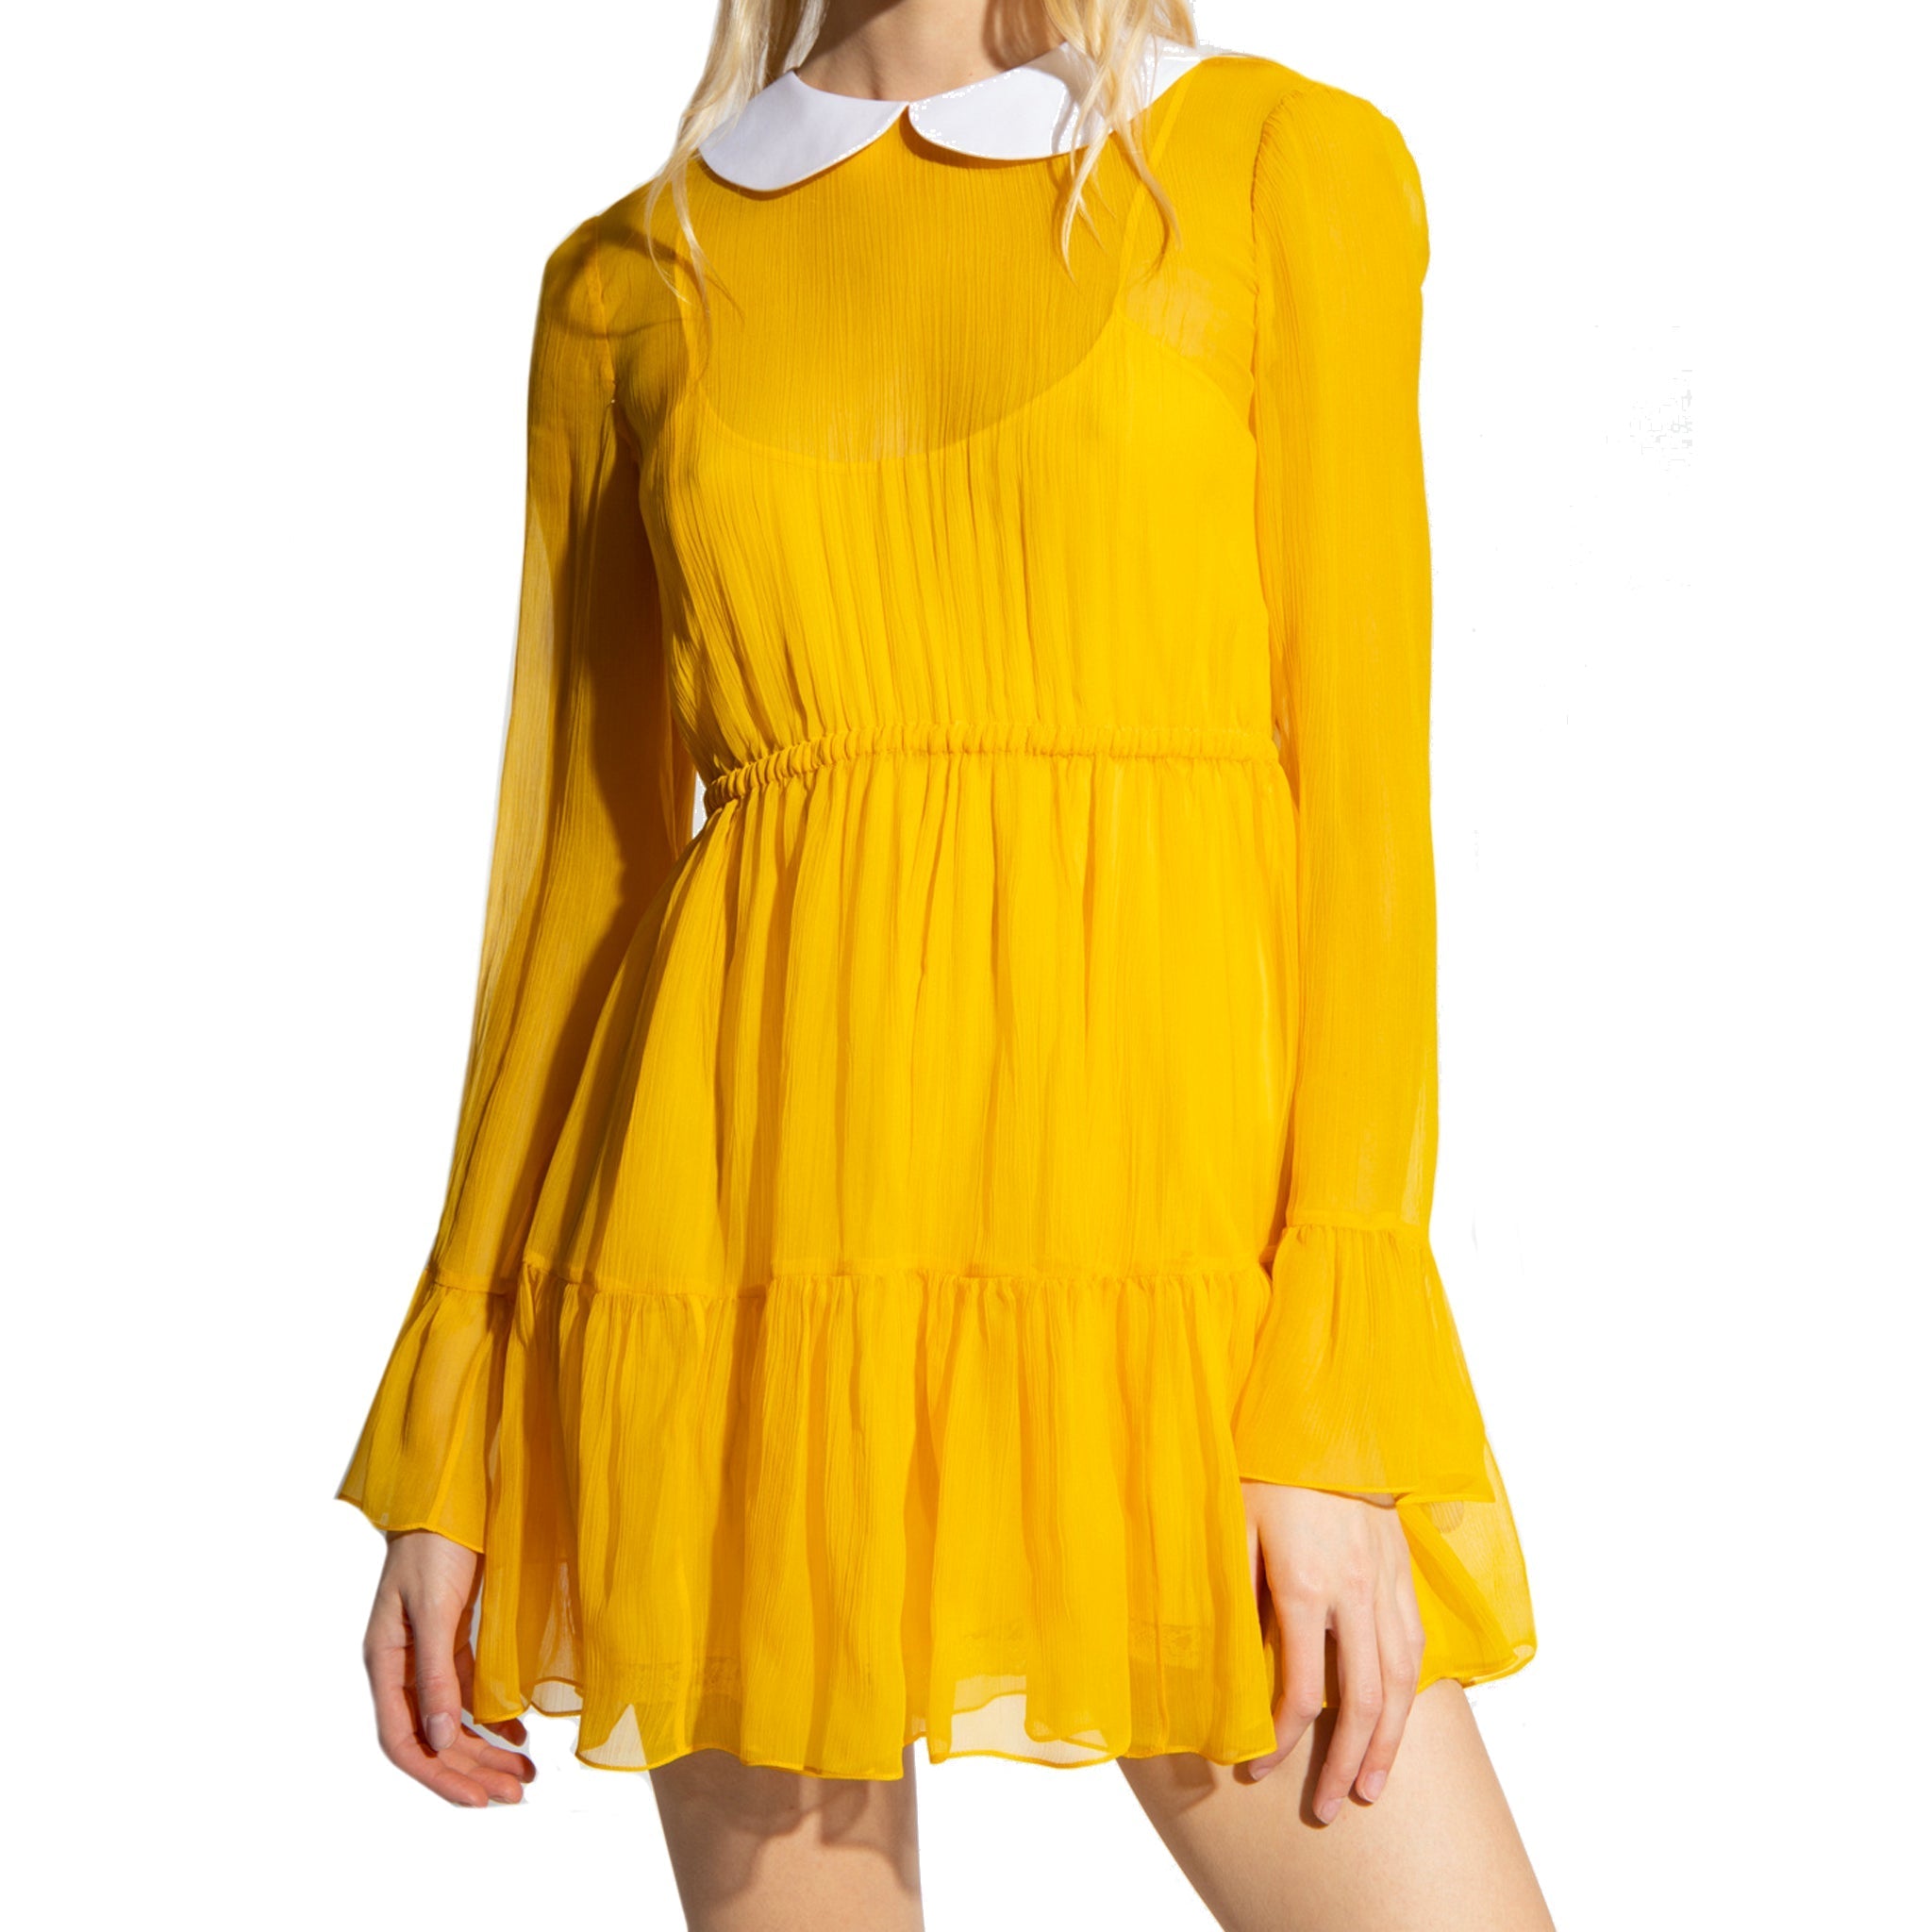 GUCCI-OUTLET-SALE-Gucci-Silk-Chiffon-Dress-WOMEN-CLOTHING-YELLOW-42-ARCHIVE-COLLECTION-2.jpg